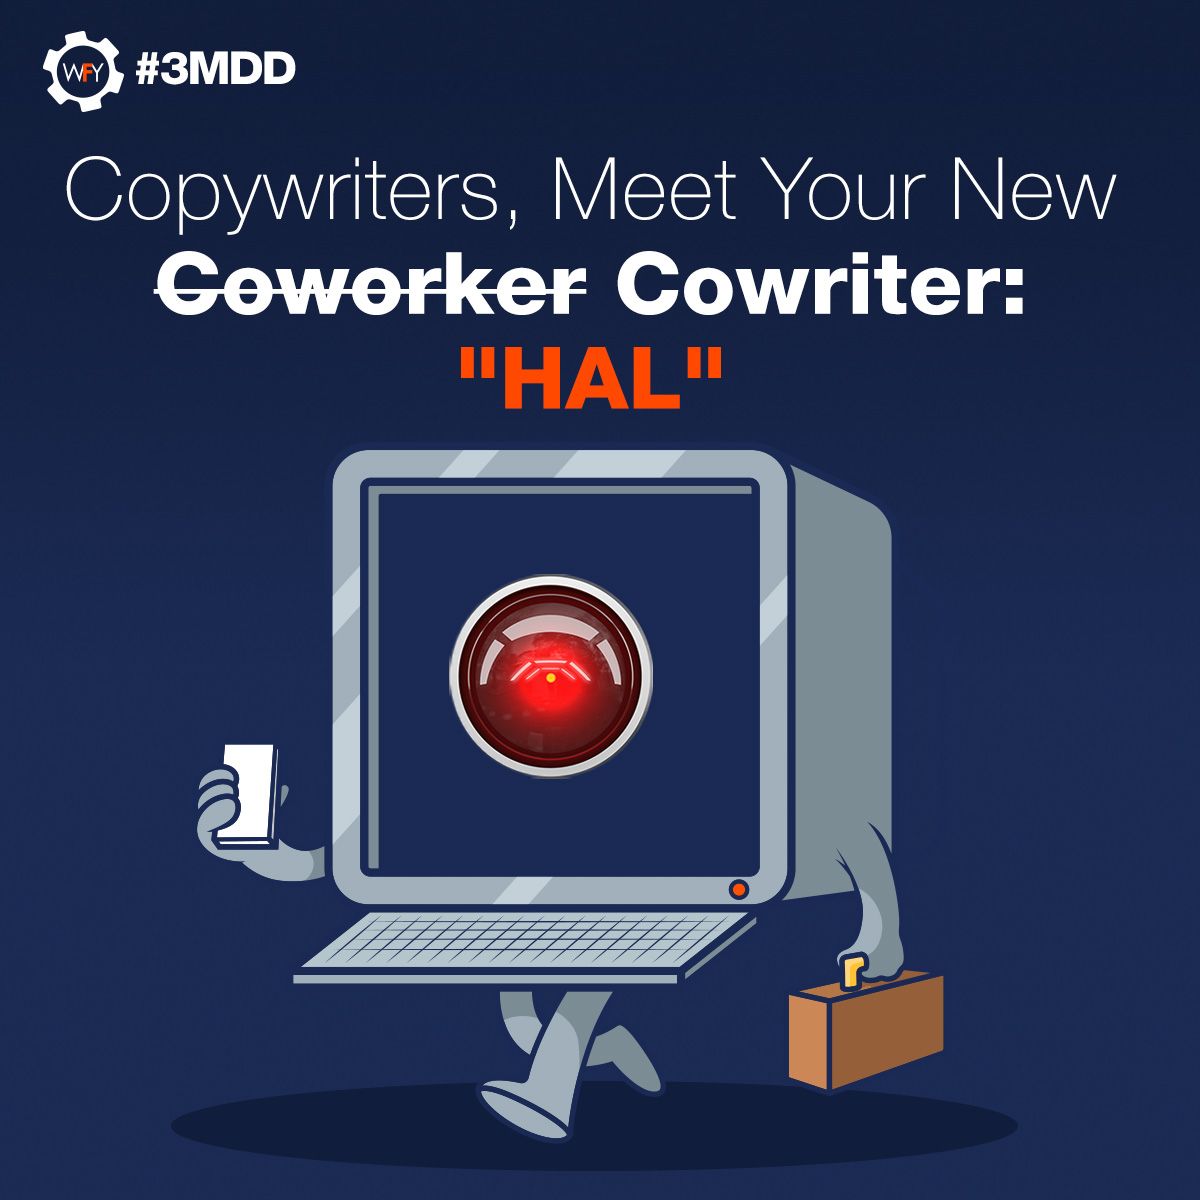 Copywriters, Meet Your New Coworker/Cowriter: 